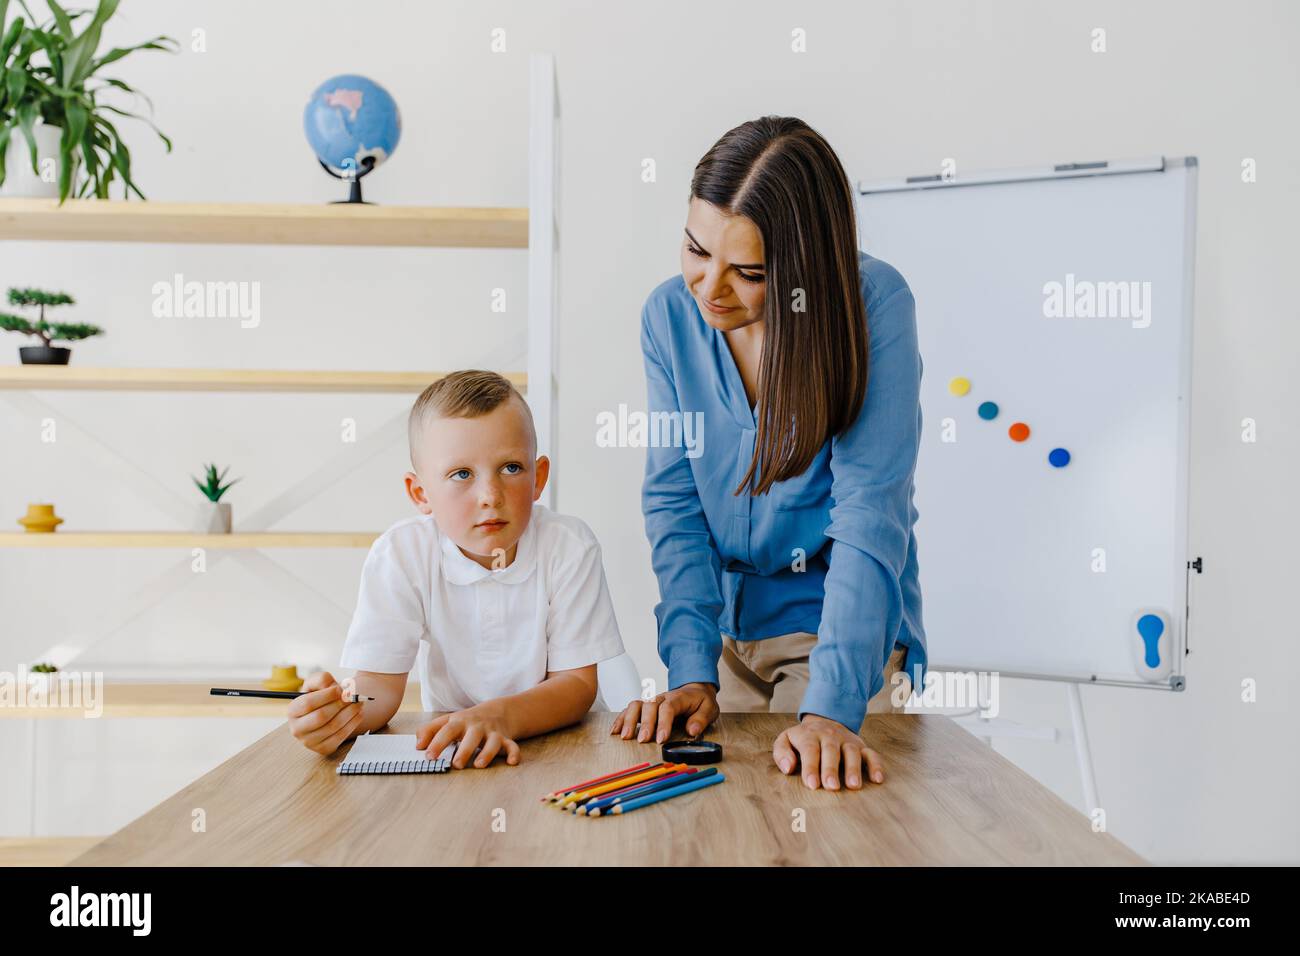 Private lesson. Attentive young woman tutor teacher helping little boy pupil with studying, correct mistakes explain learning material. Smiling mother Stock Photo